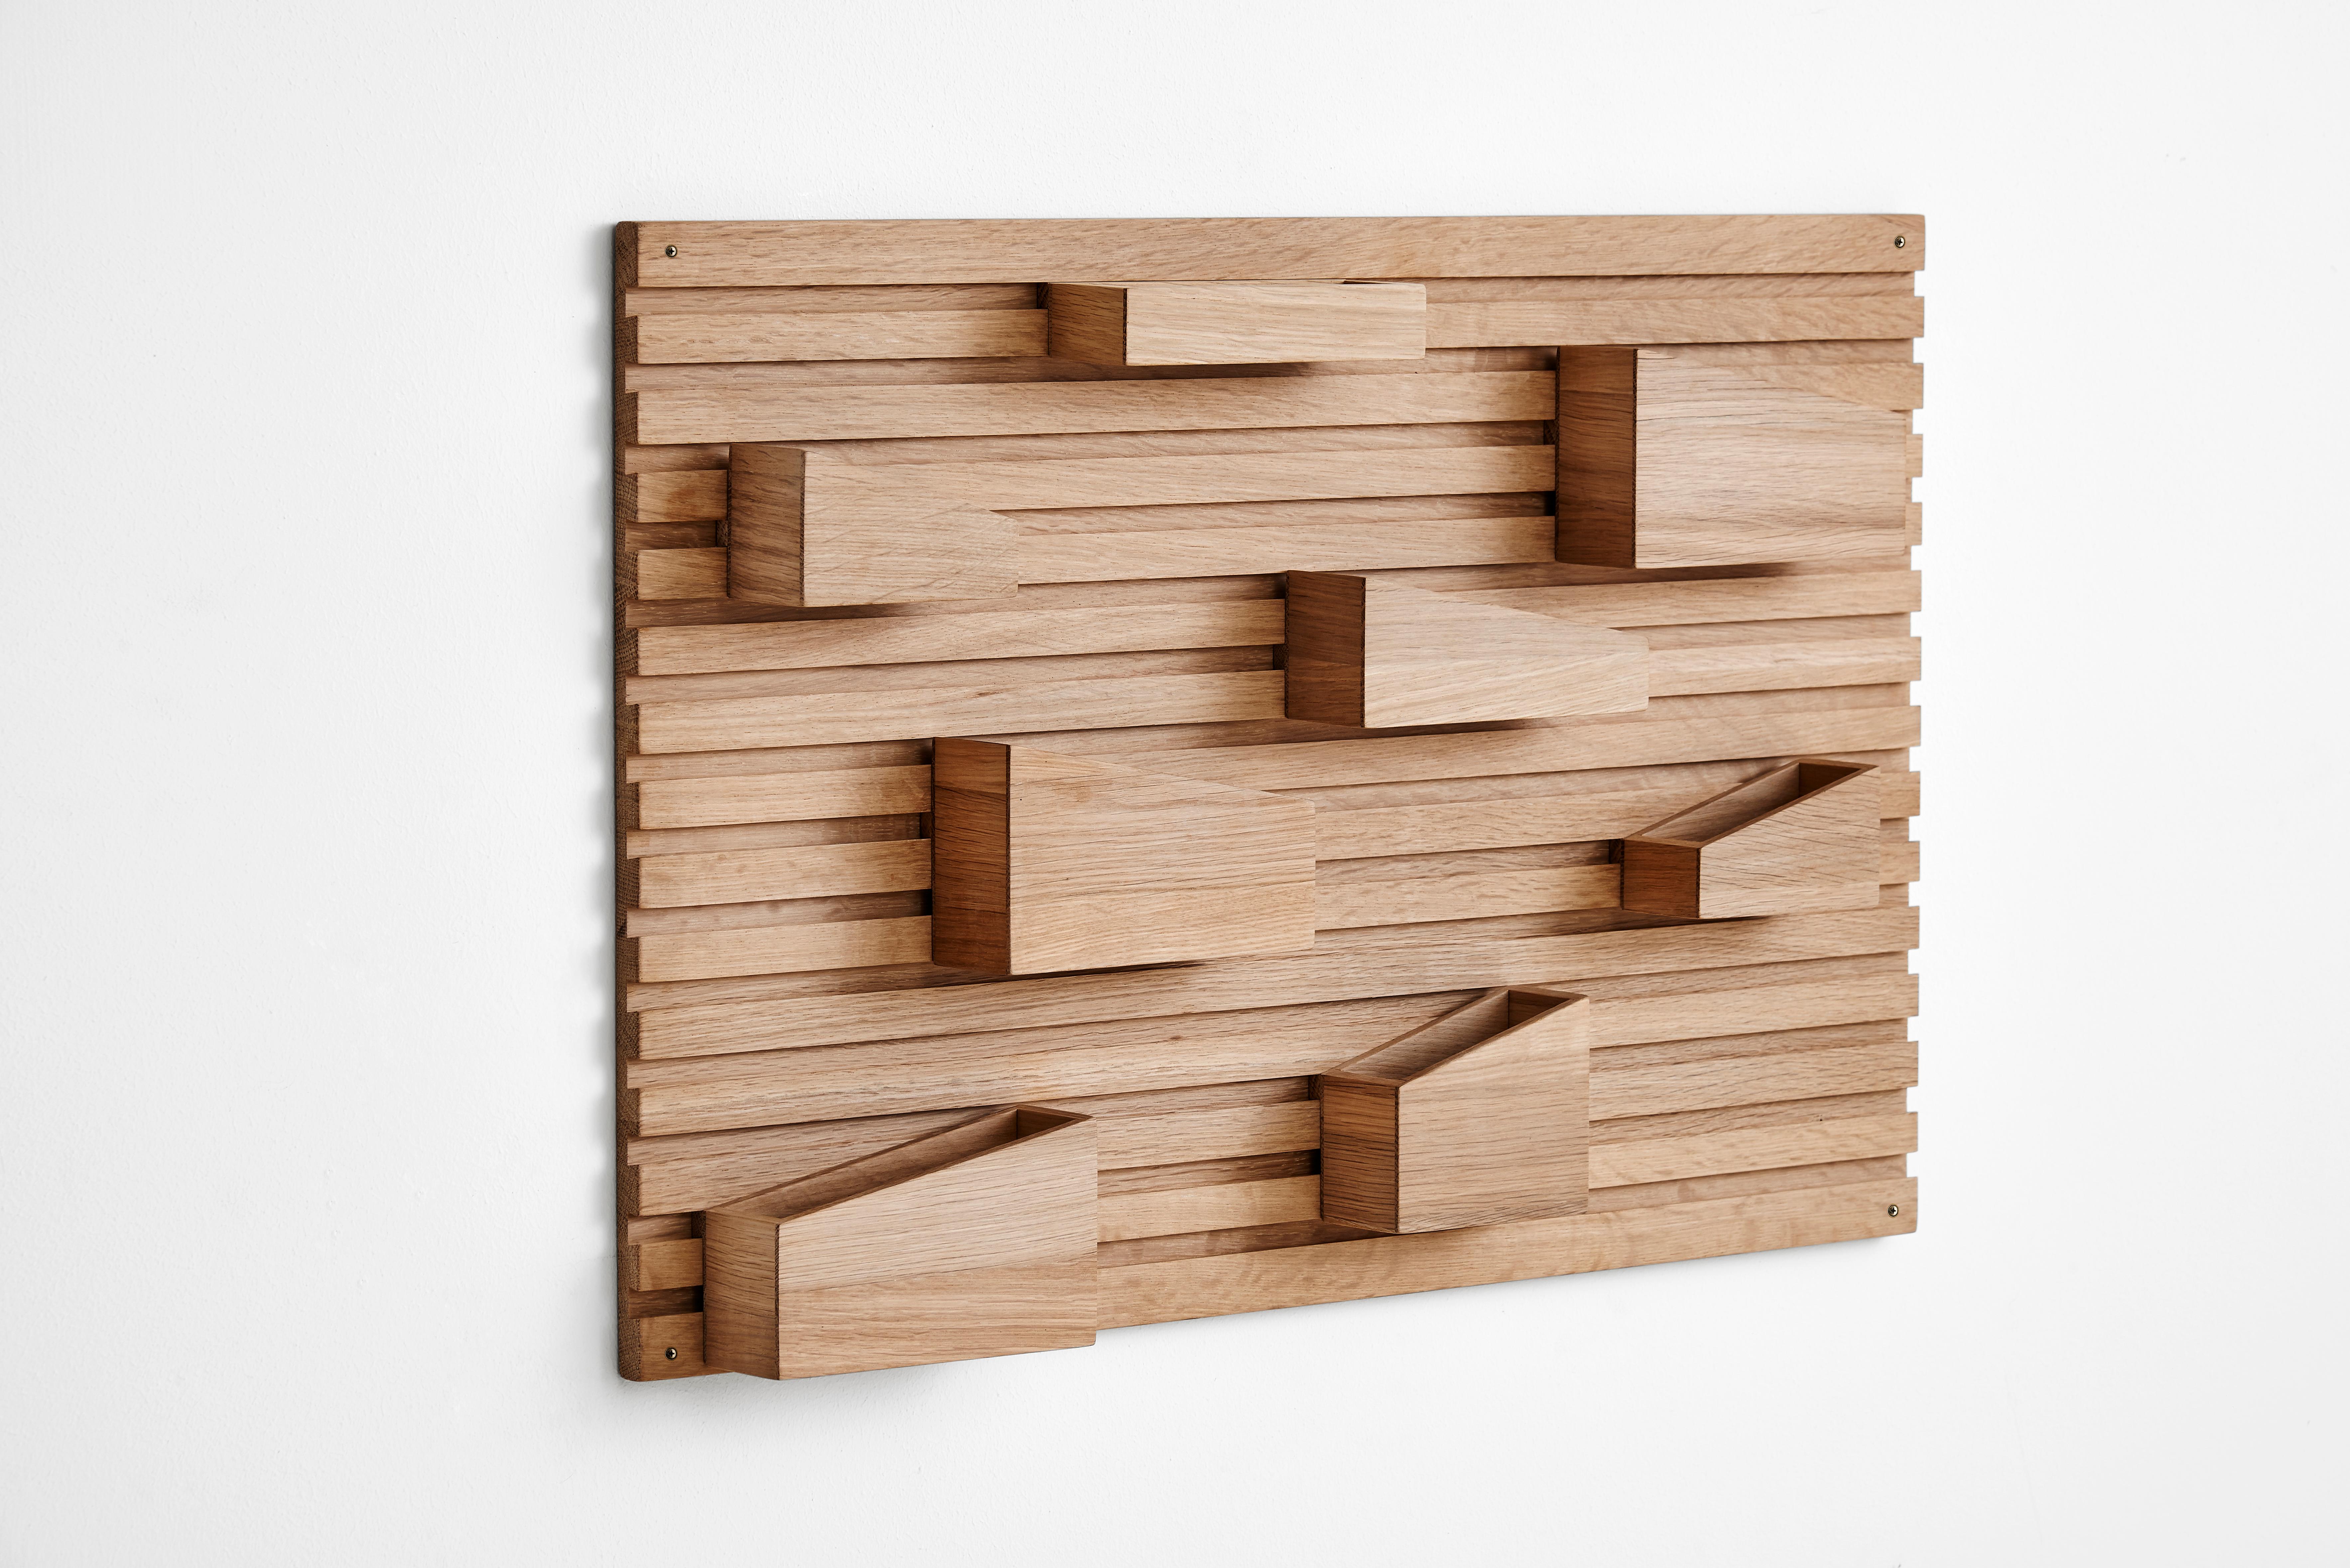 Input organiser by Anne Holm and Sigrid Smetana
Materials: Oak.
Dimensions: D 6.5 x W 66 x H 44 cm

Input is a flexible organiser with eight movable boxes in different dimensions and shapes. Allowing you to create the exact expression you want -